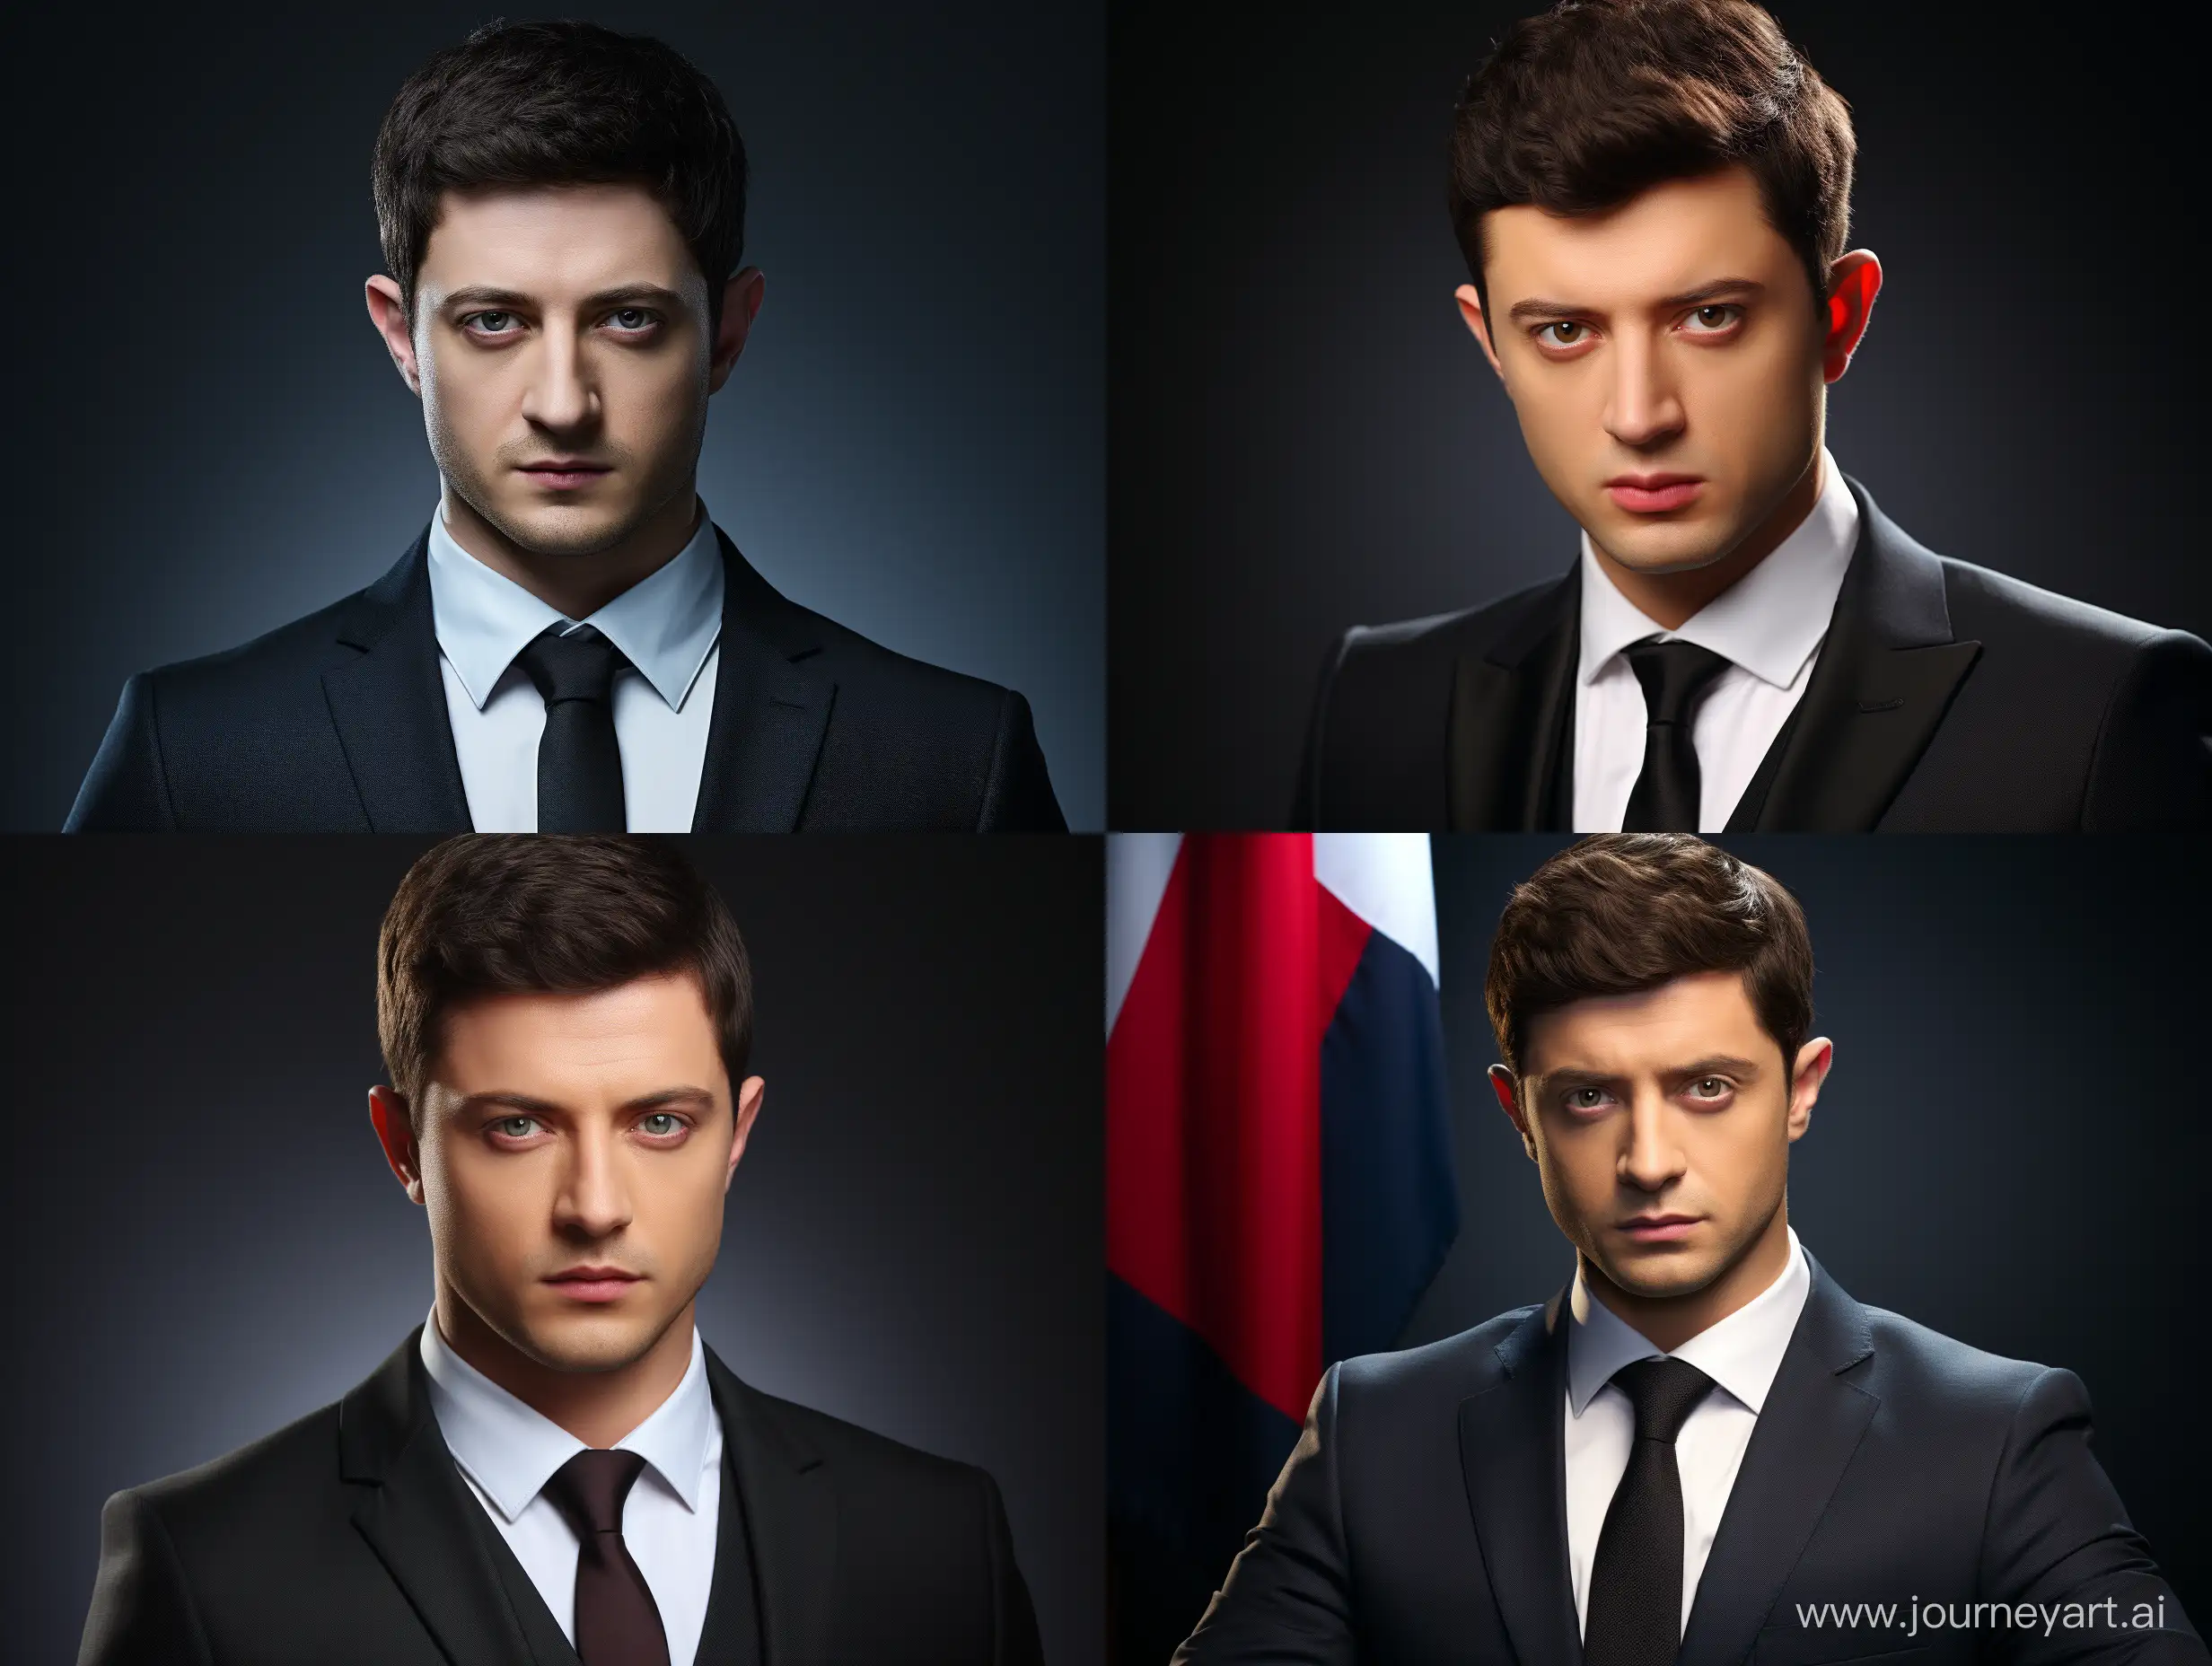 Born to a Ukrainian Jewish family, Zelenskyy grew up as a native Russian speaker in Kryvyi Rih, a major city of Dnipropetrovsk Oblast in central Ukraine. Prior to his acting career, he obtained a degree in law from the Kyiv National Economic University. He then pursued a career in comedy and created the production company Kvartal 95, which produced films, cartoons, and TV shows including the TV series Servant of the People, in which Zelenskyy played a fictional Ukrainian president. The series aired from 2015 to 2019 and was immensely popular. A political party with the same name as the TV show was created in March 2018 by employees of Kvartal 95.